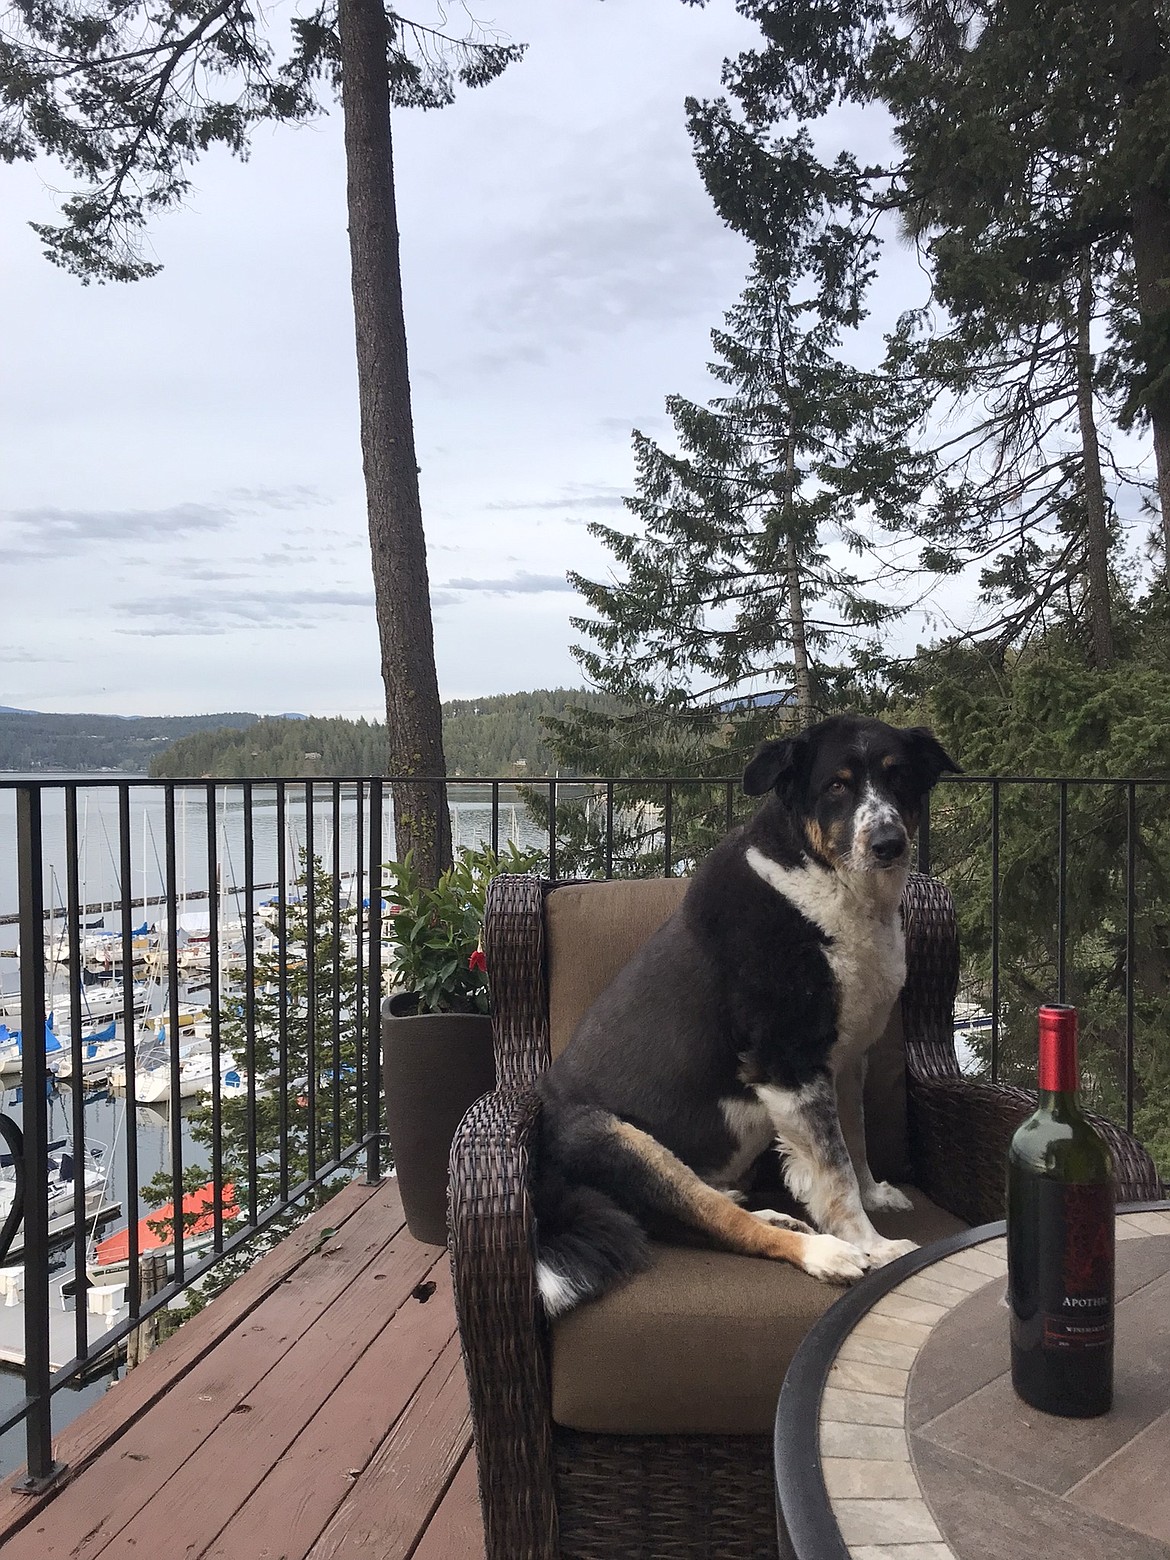 Uncle Sam was born on the Fourth of July and enjoys sitting on the deck overlooking Lake Coeur d'Alene. Submitted by Dave Beguelin.